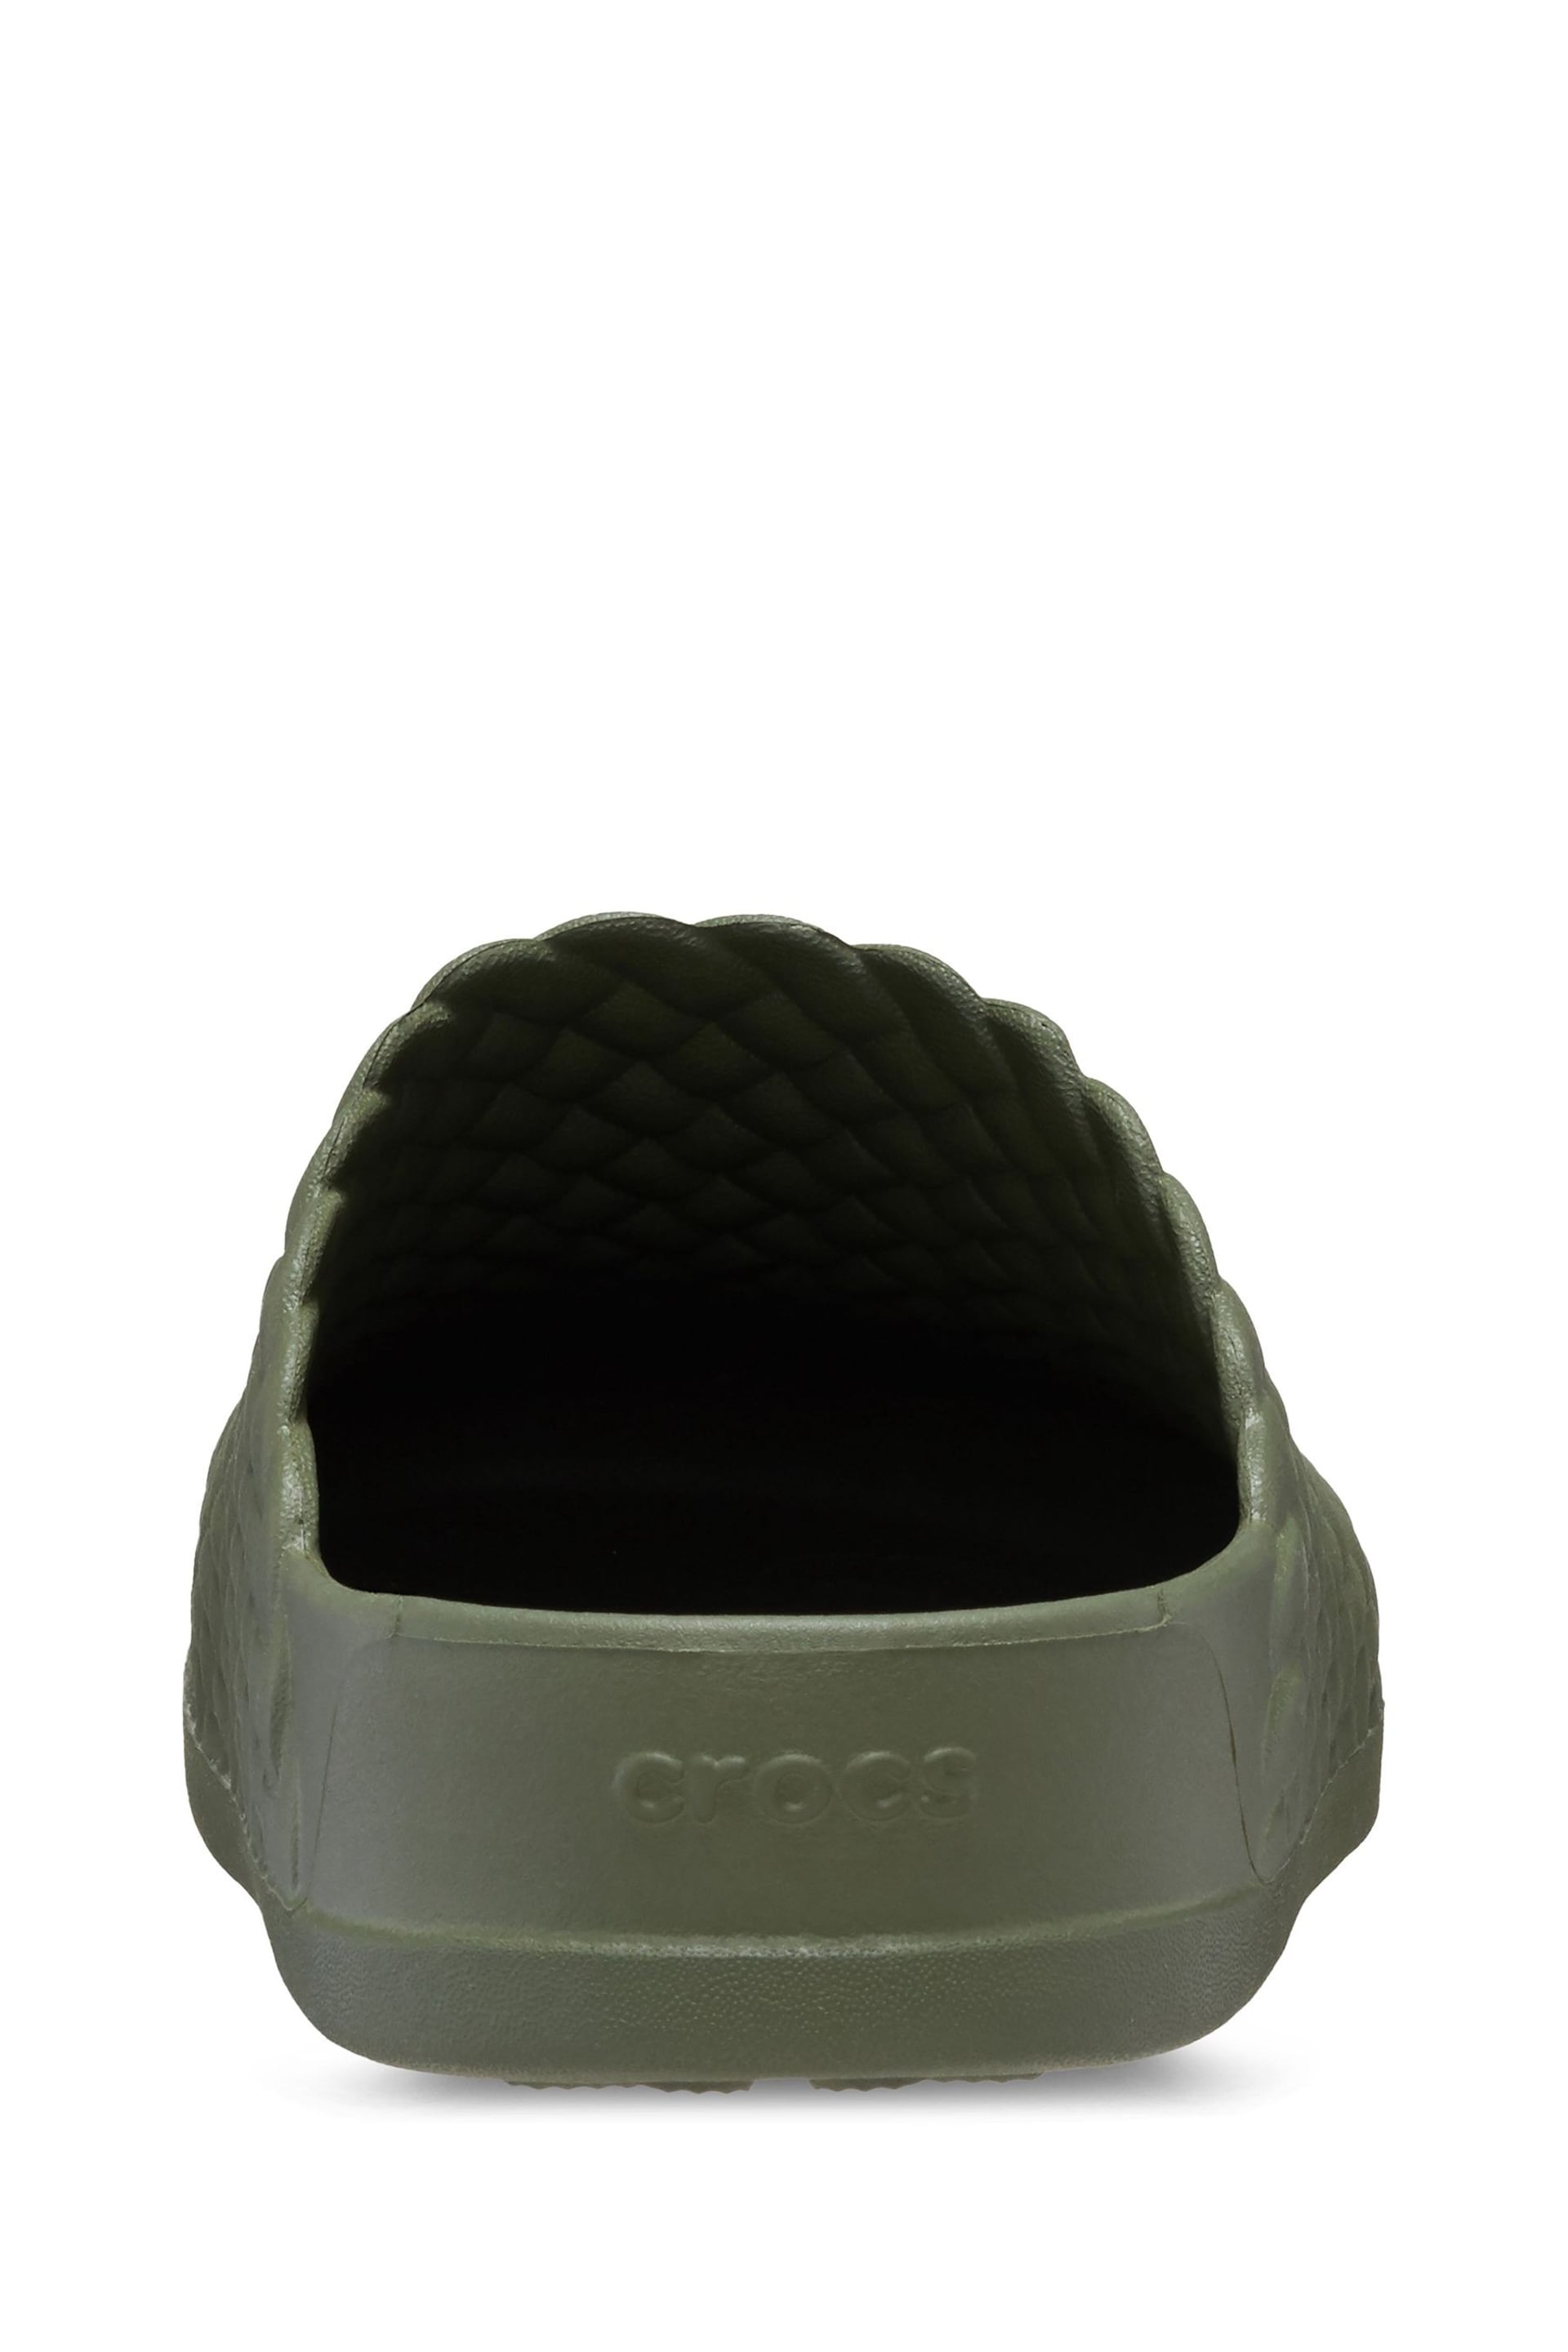 Crocs Dylan Woven Texture Clogs - Image 4 of 6